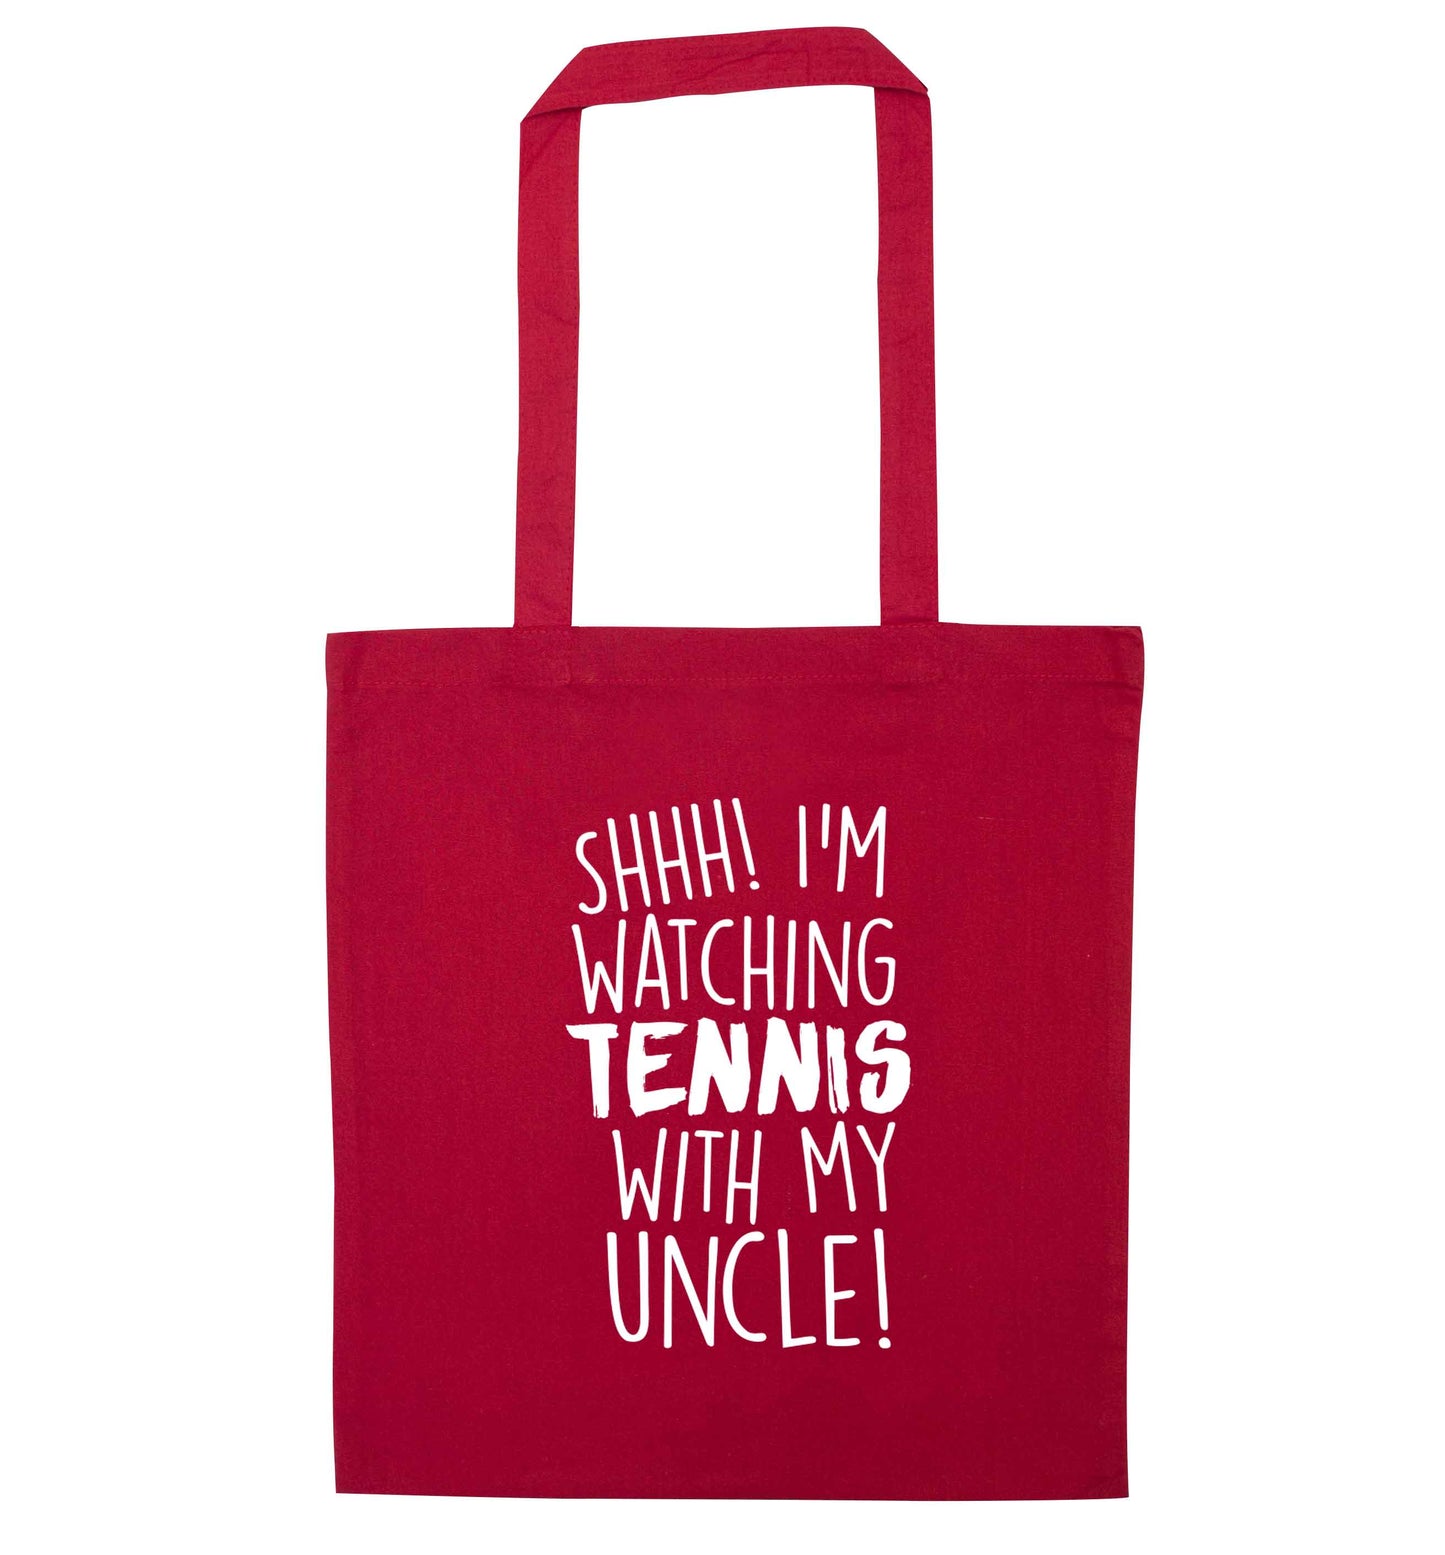 Shh! I'm watching tennis with my uncle! red tote bag